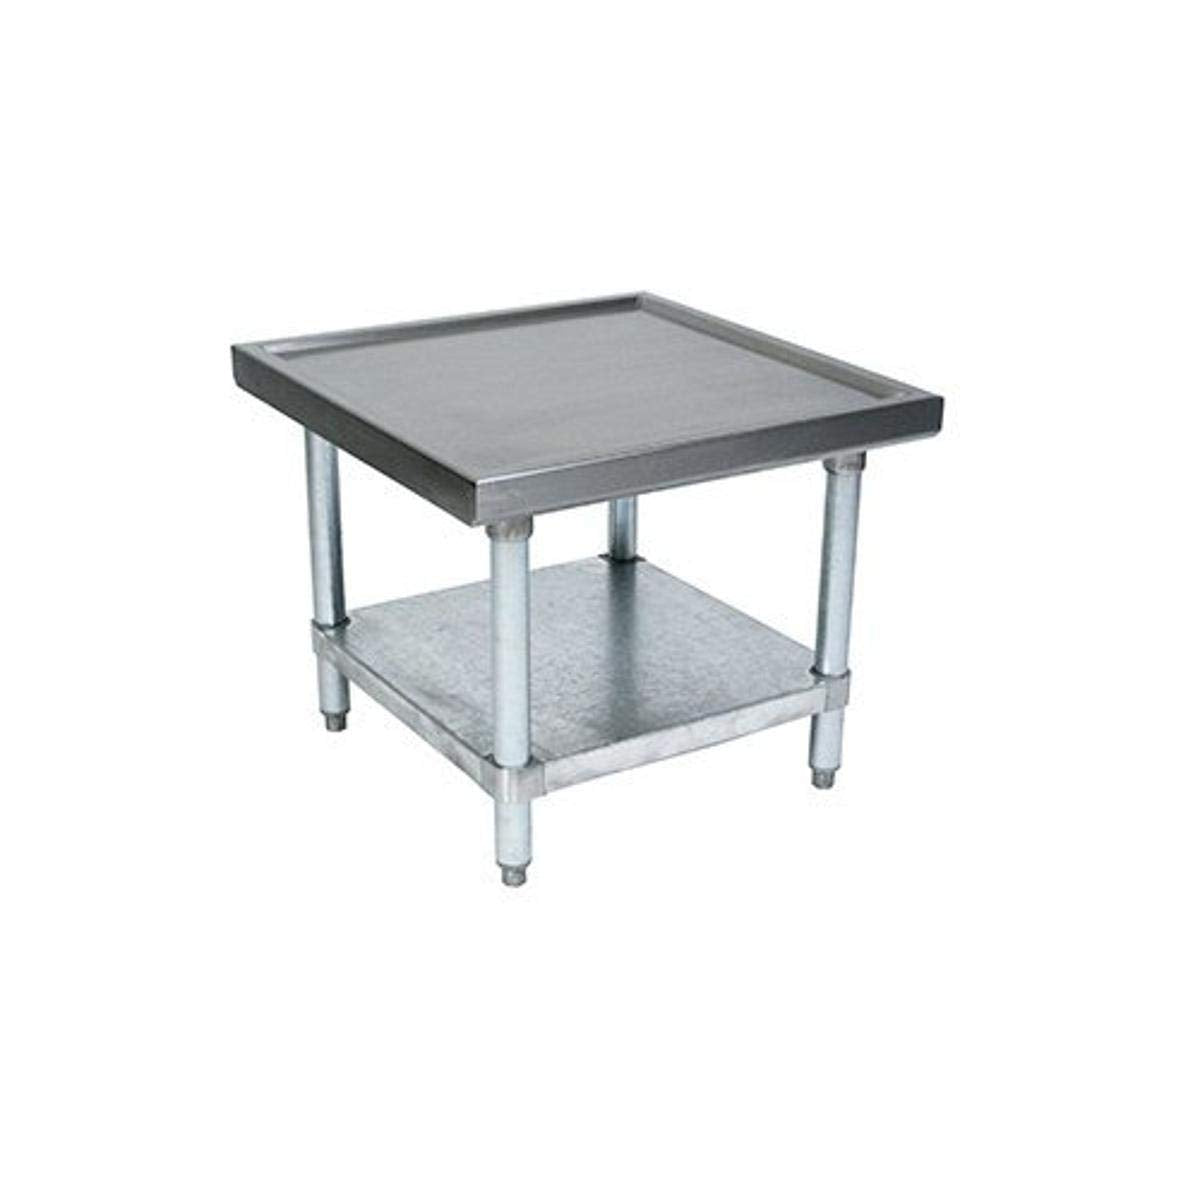 John Boos MS4-2430GSK Stainless Steel Heavy Duty Machine Stand, Galvanized Legs and Undershelves, 30" Length x 24" Width